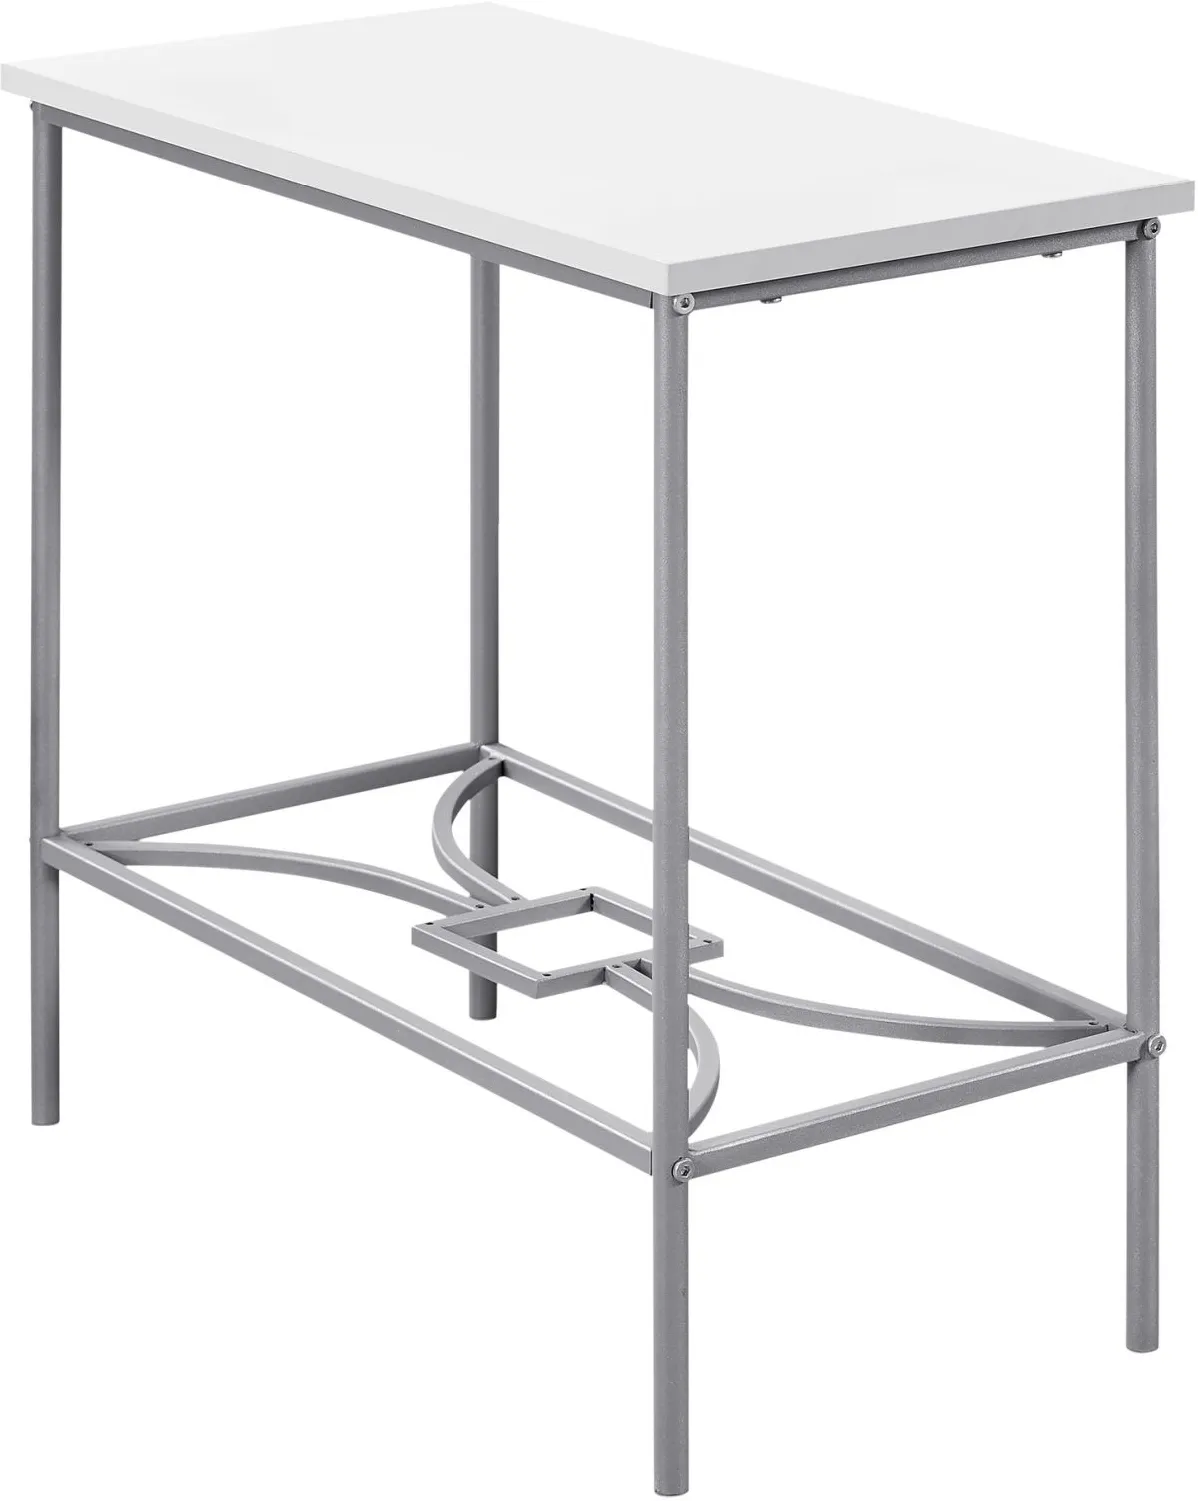 Accent Table, Side, End, Narrow, Small, 2 Tier, Living Room, Bedroom, Metal, Laminate, White, Grey, Contemporary, Modern